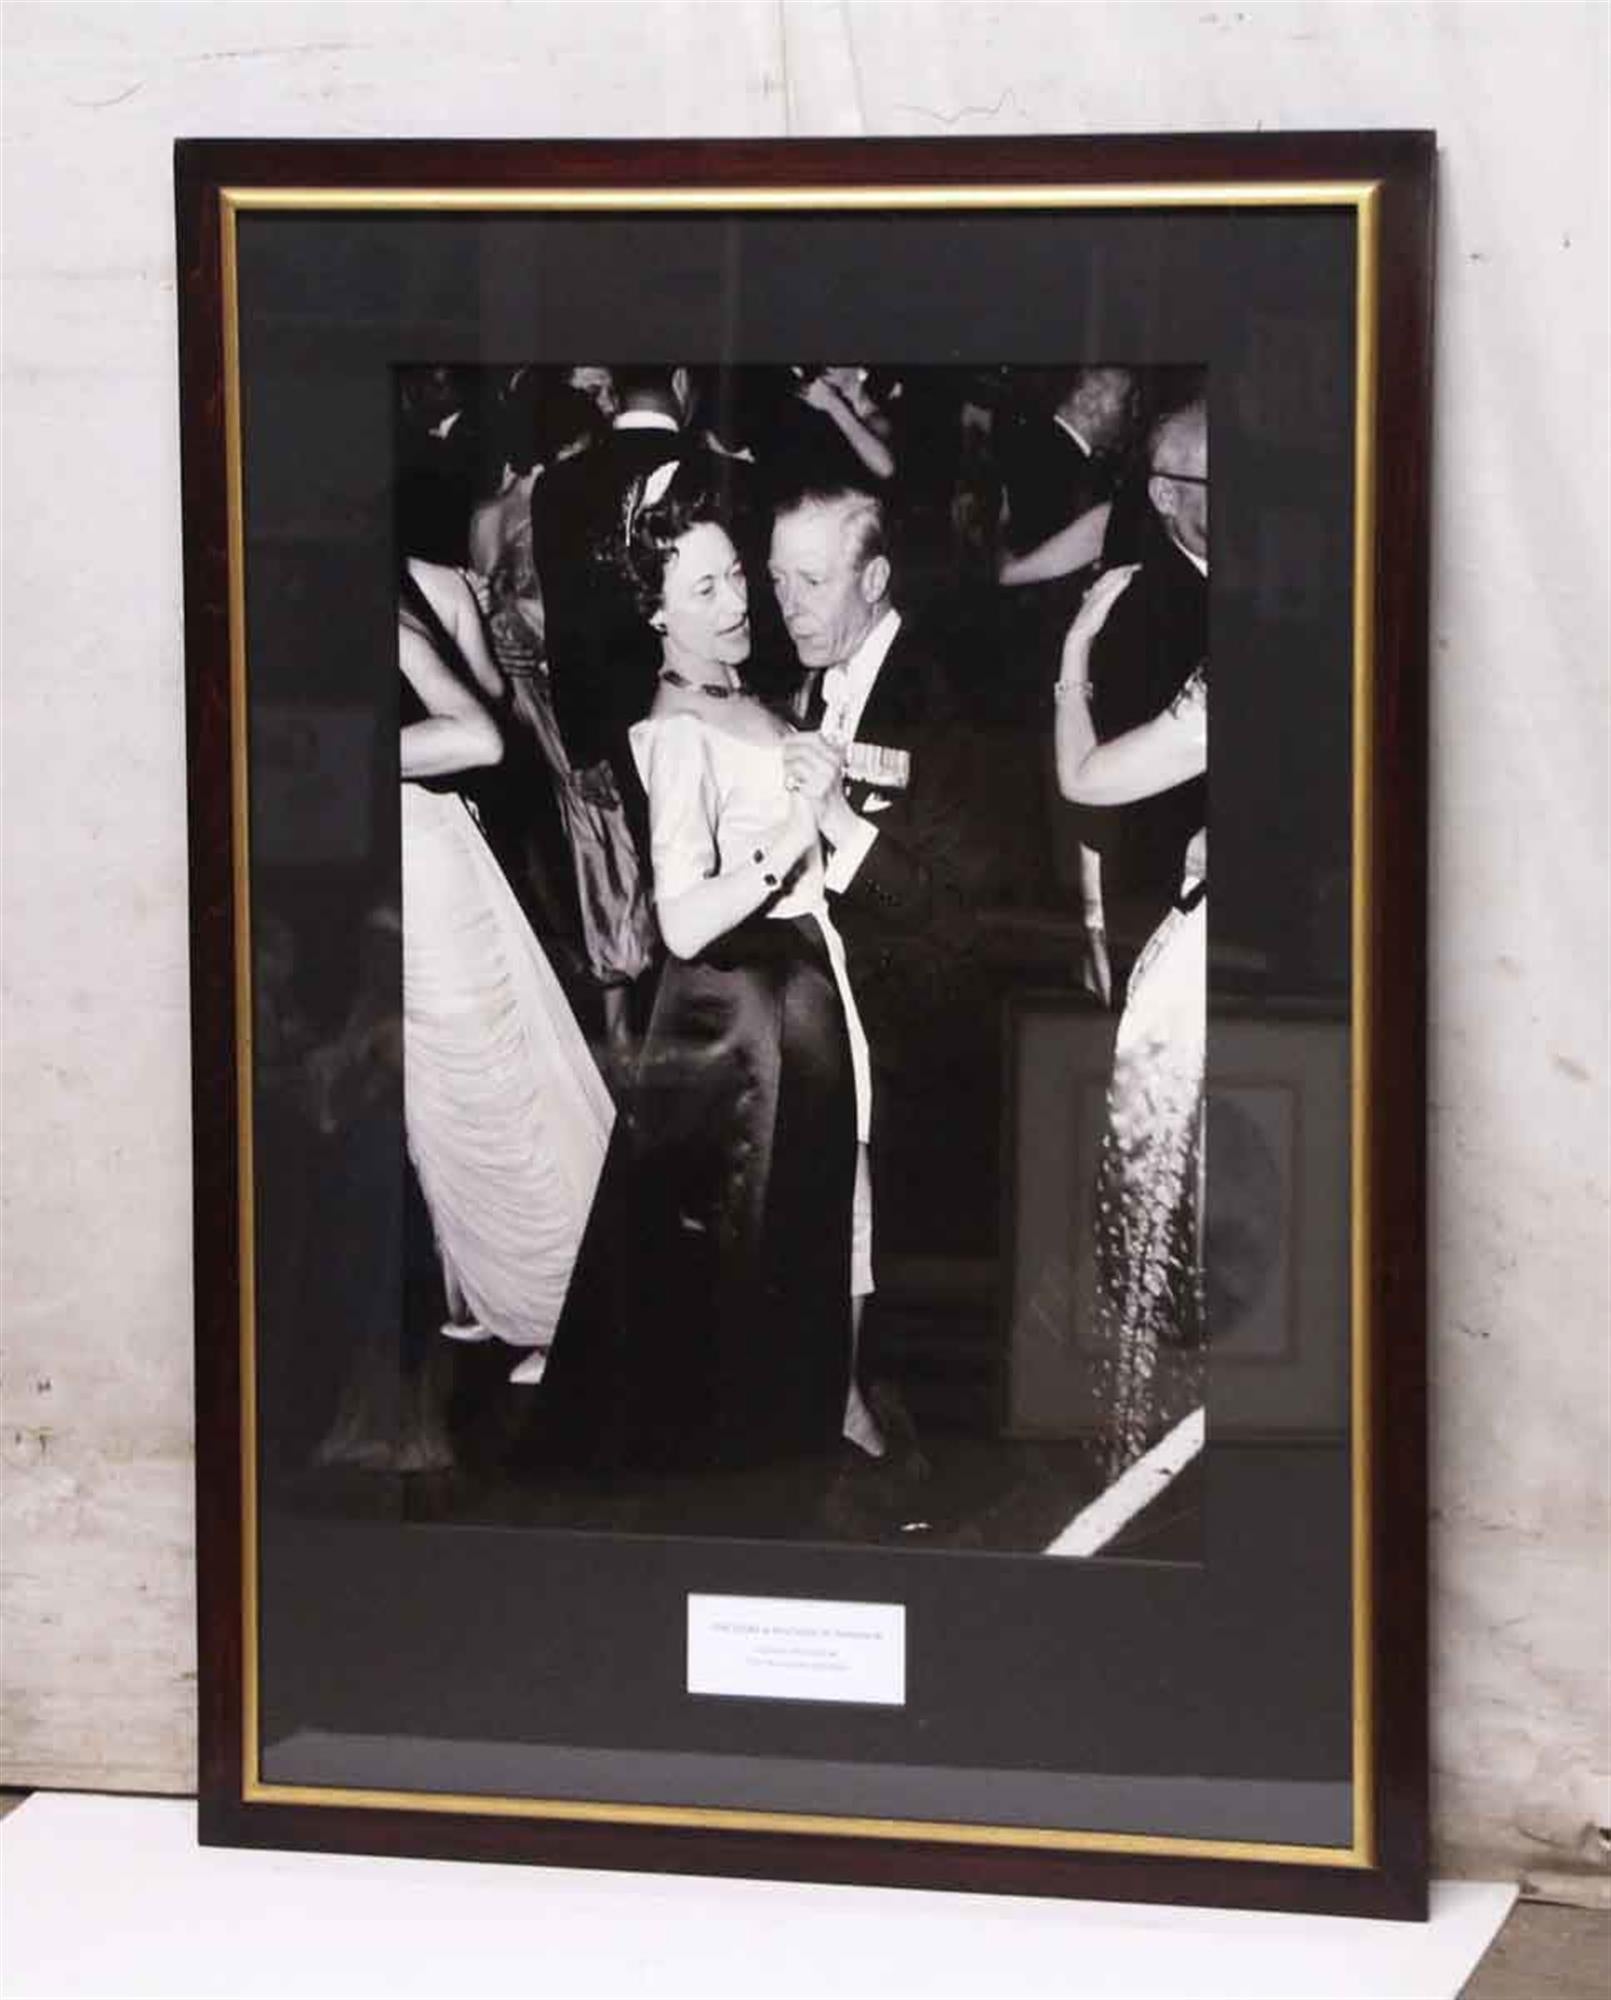 Framed 1980s black and white photograph of The Duke and Duchess of Windsor dancing in the grand ballroom of The Waldorf Astoria. Known as Edward VIII. Edward was the eldest son of King George V and Queen Mary. Edward became king on his father's